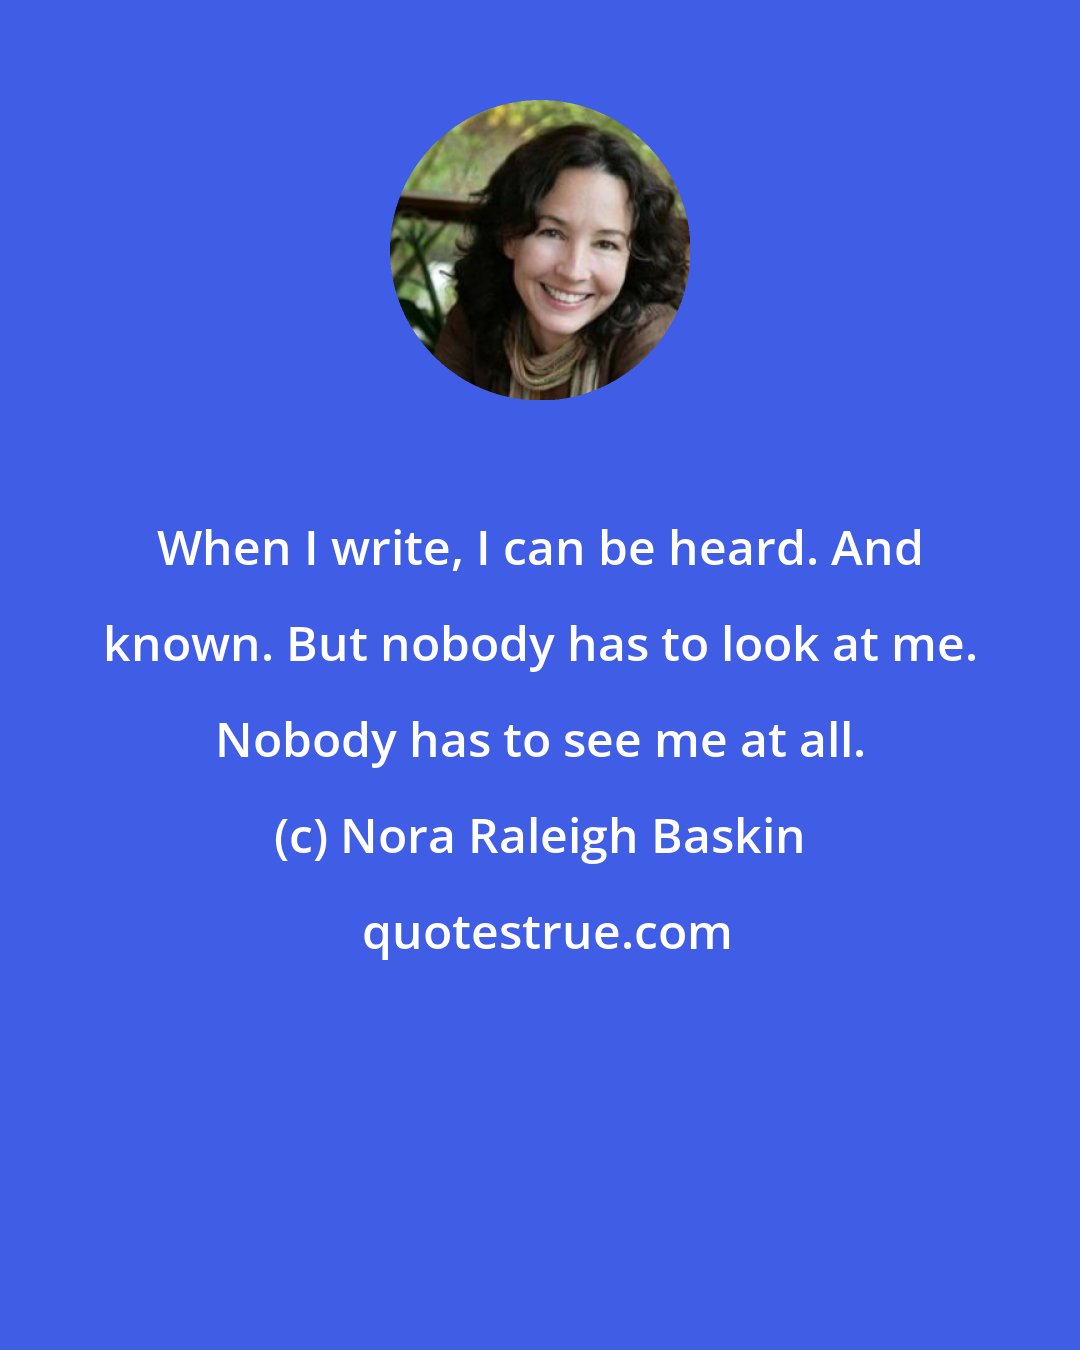 Nora Raleigh Baskin: When I write, I can be heard. And known. But nobody has to look at me. Nobody has to see me at all.